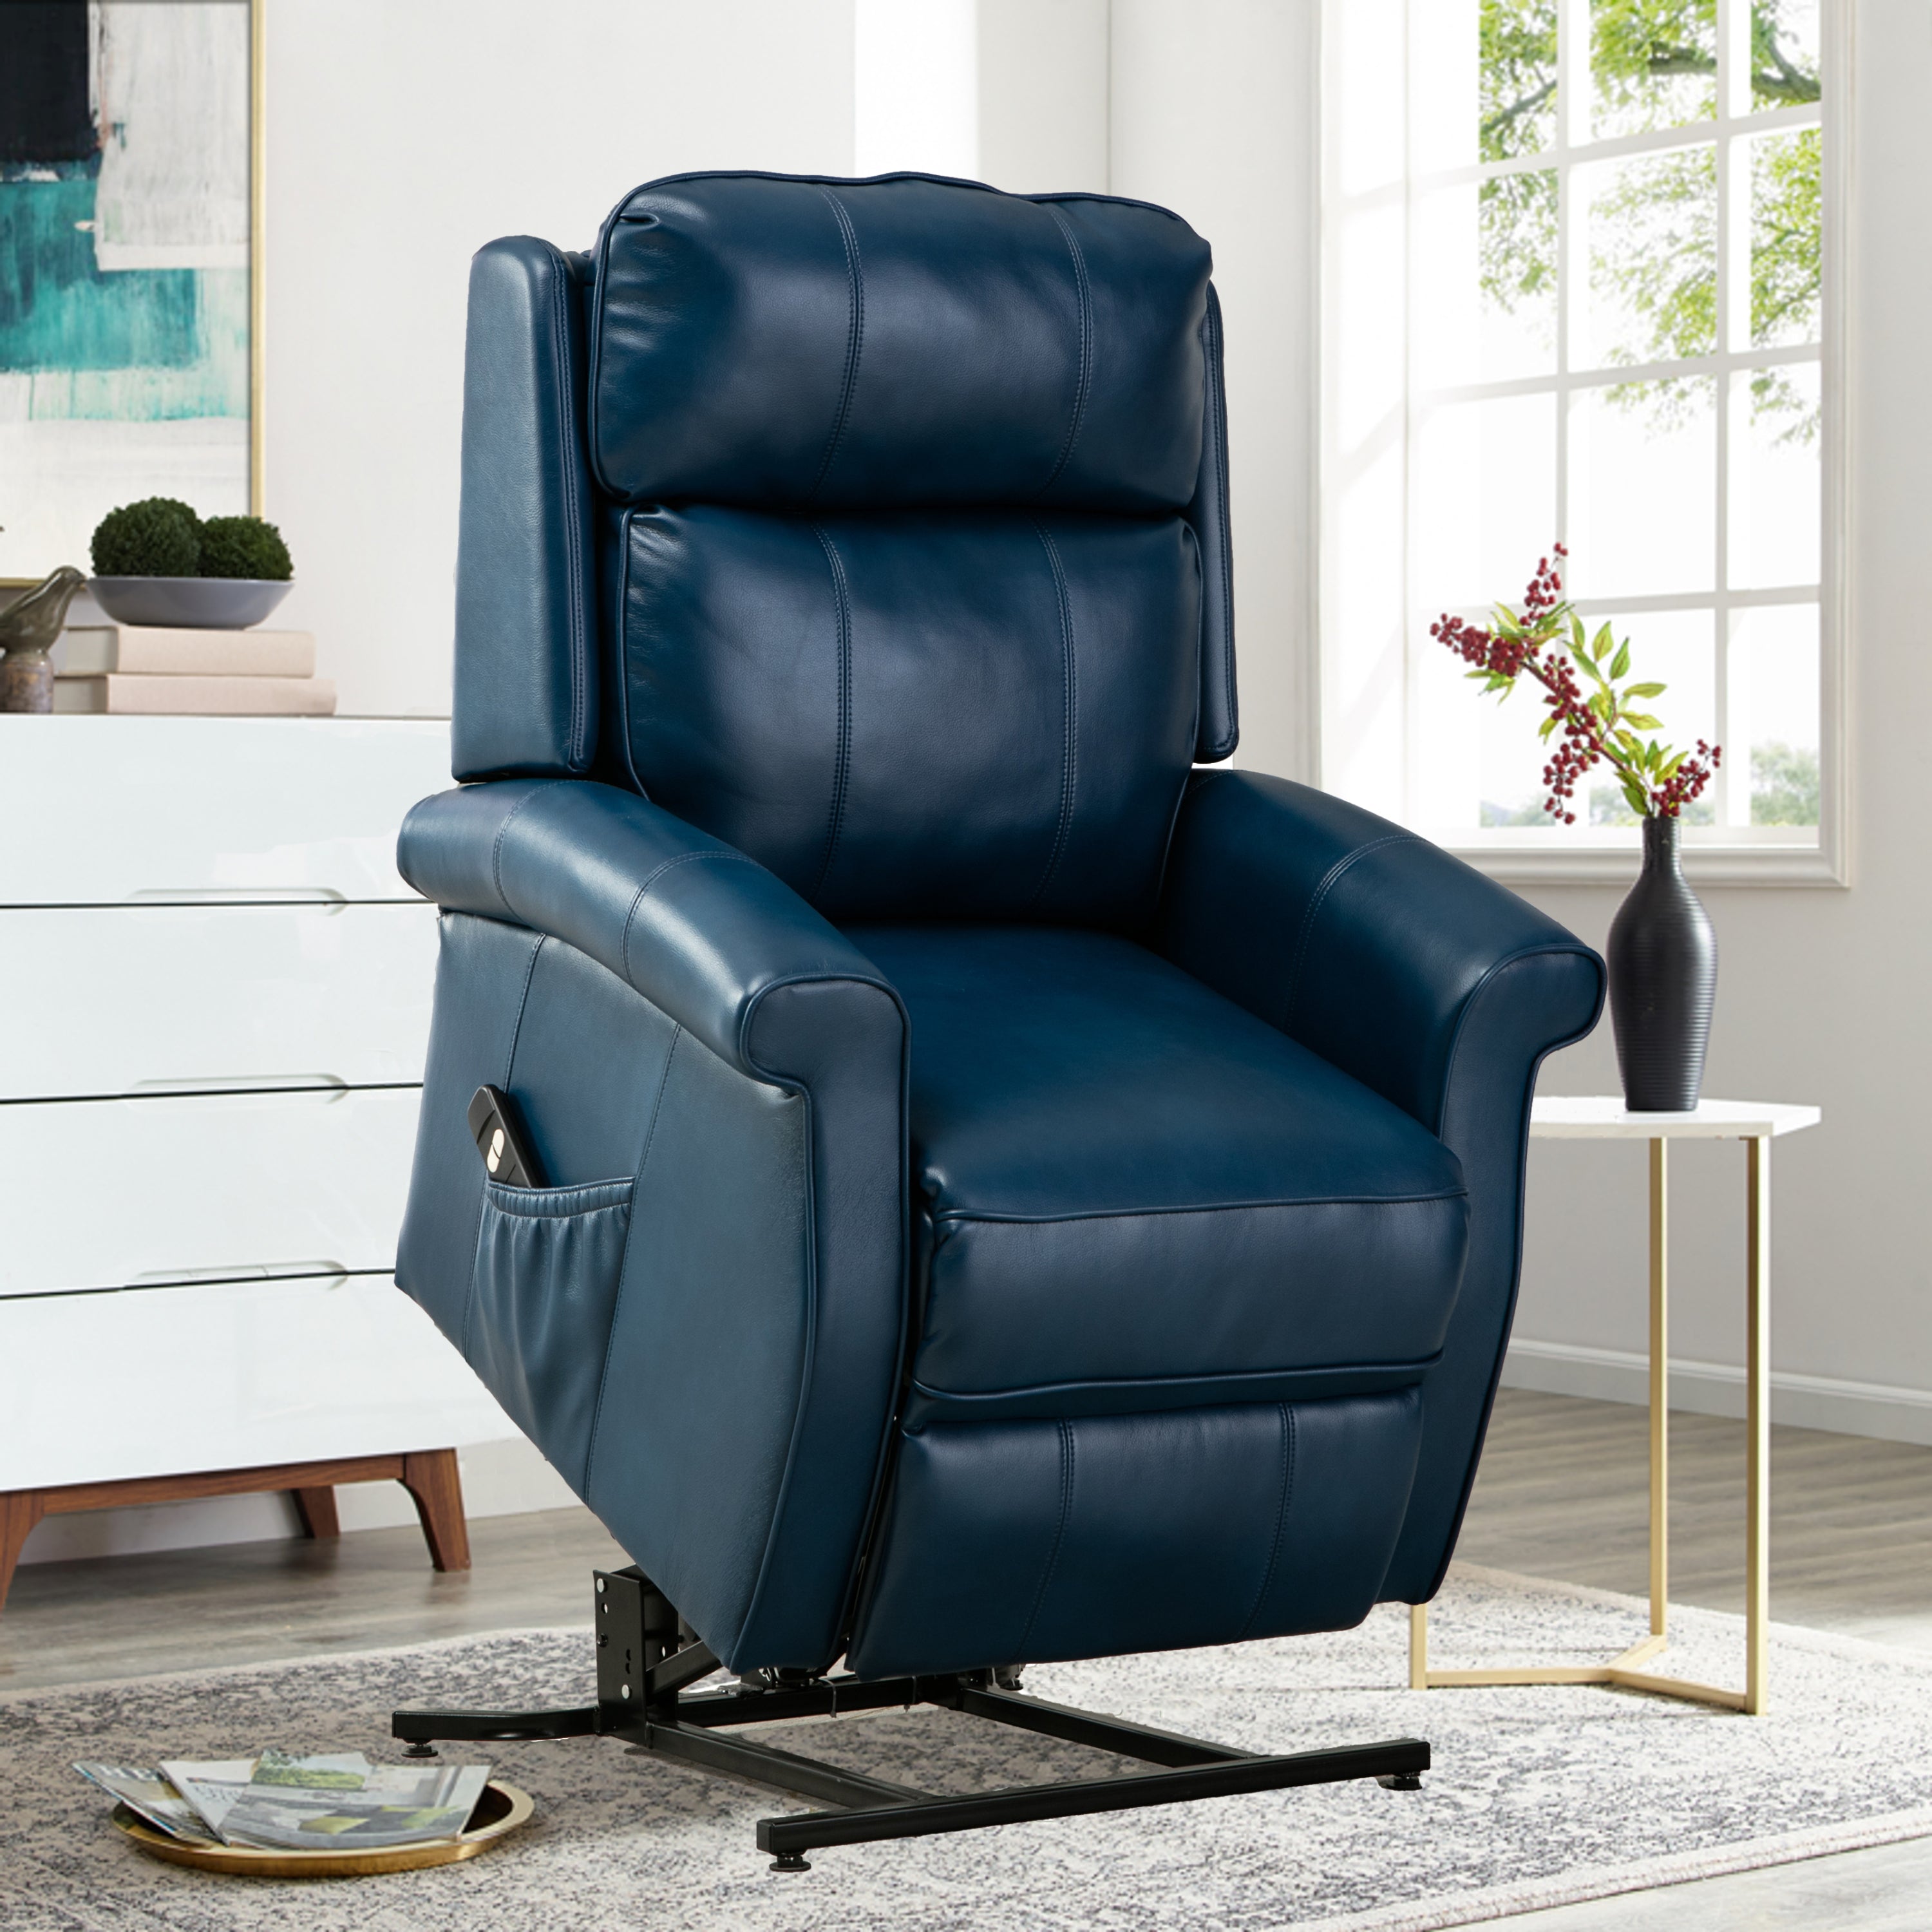 Landis Chair Navy Blue Lift Chair Recliner, lifted angle